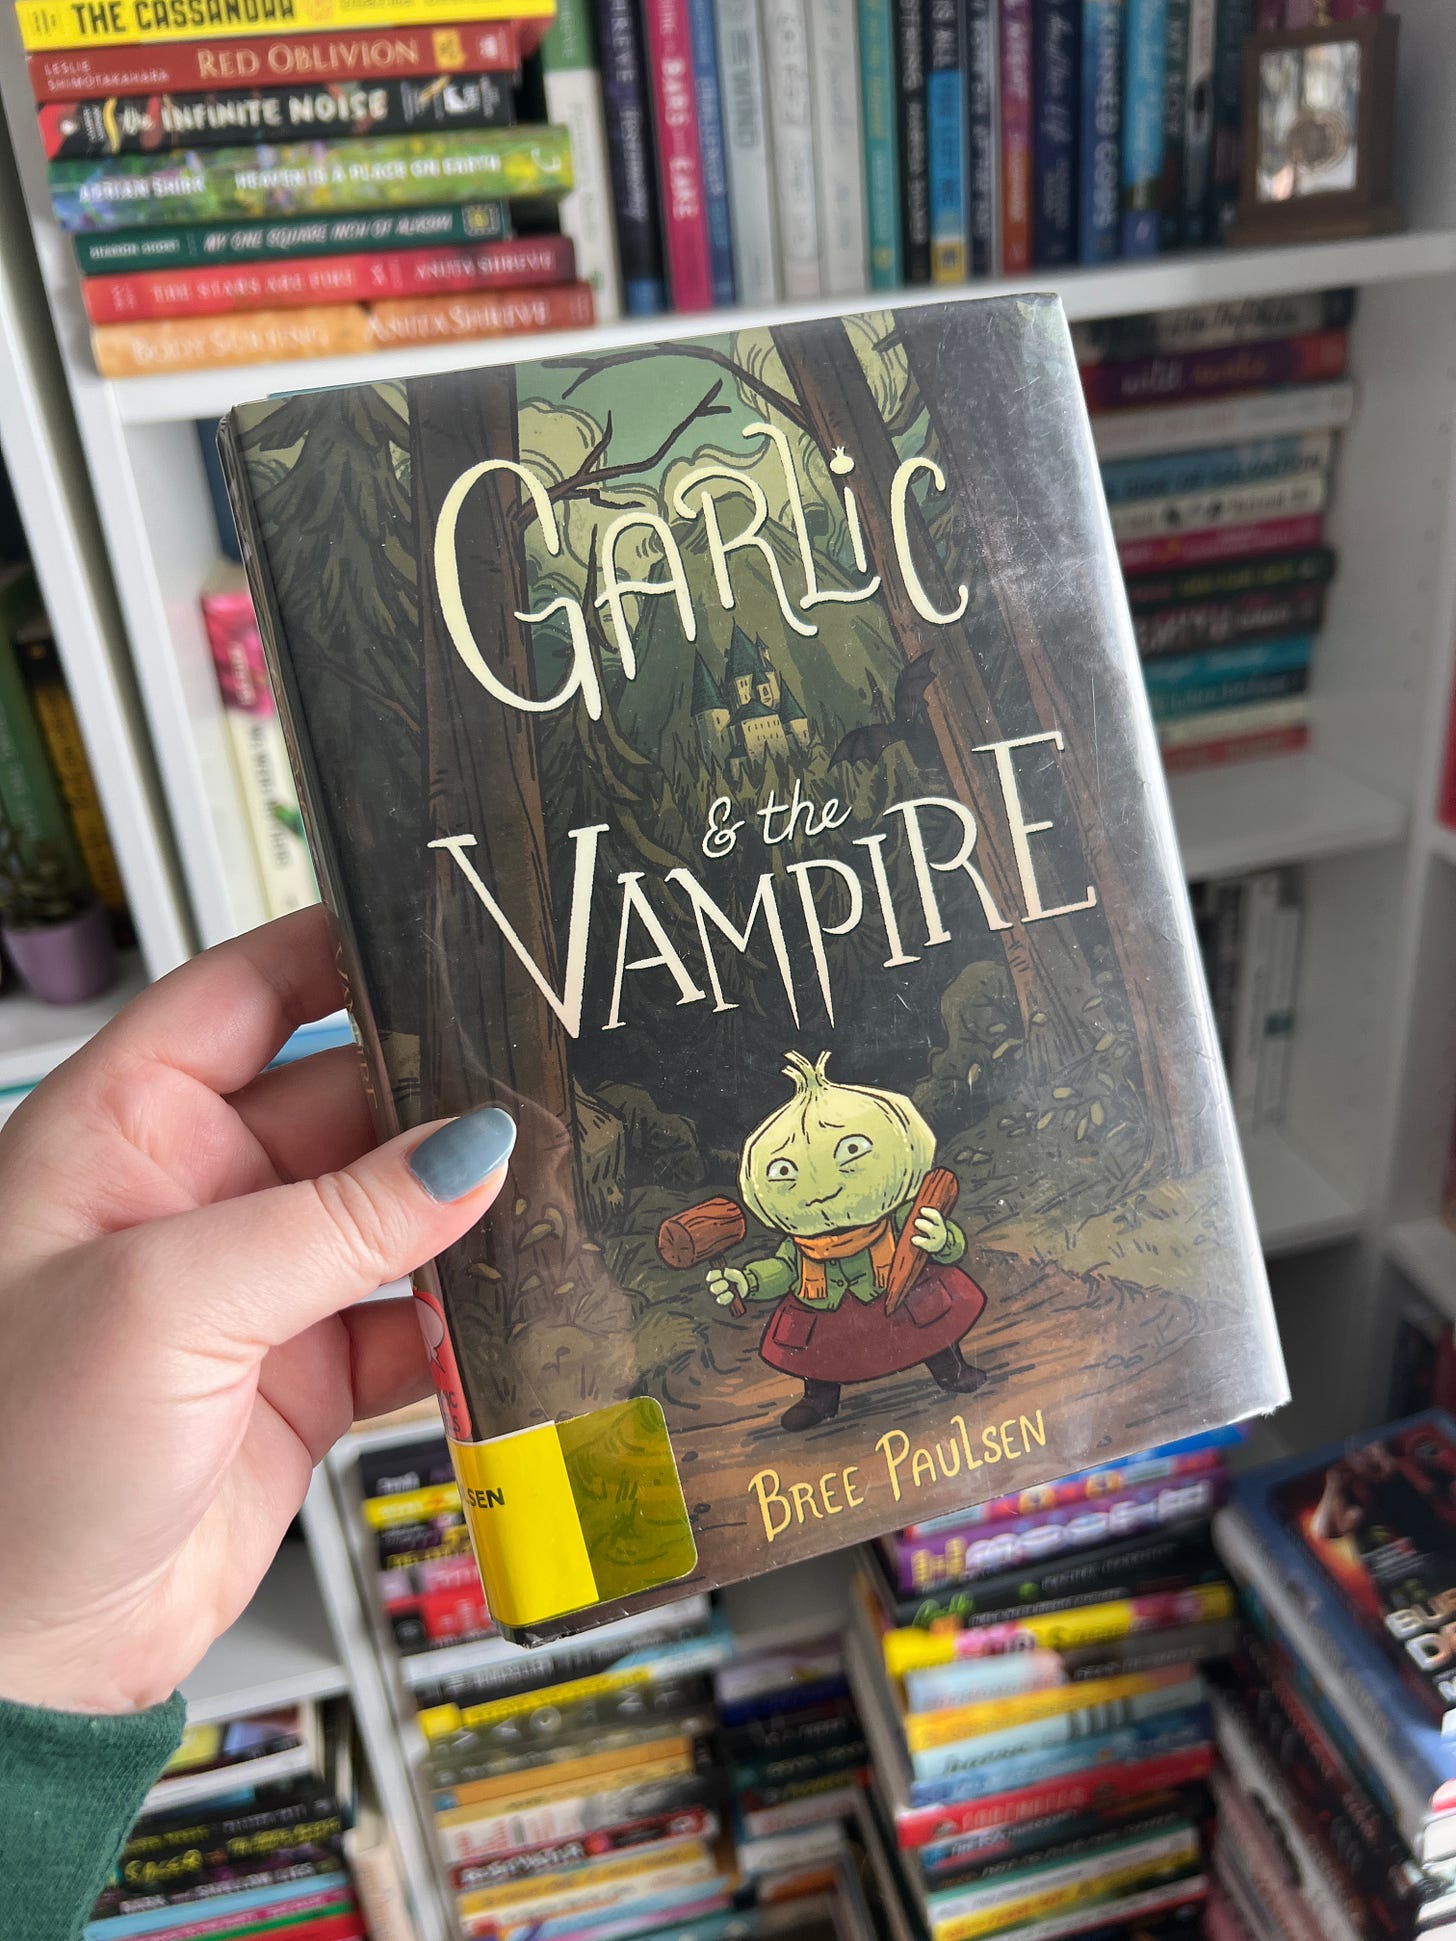 My hand holding a library copy of Garlic and the Vampire